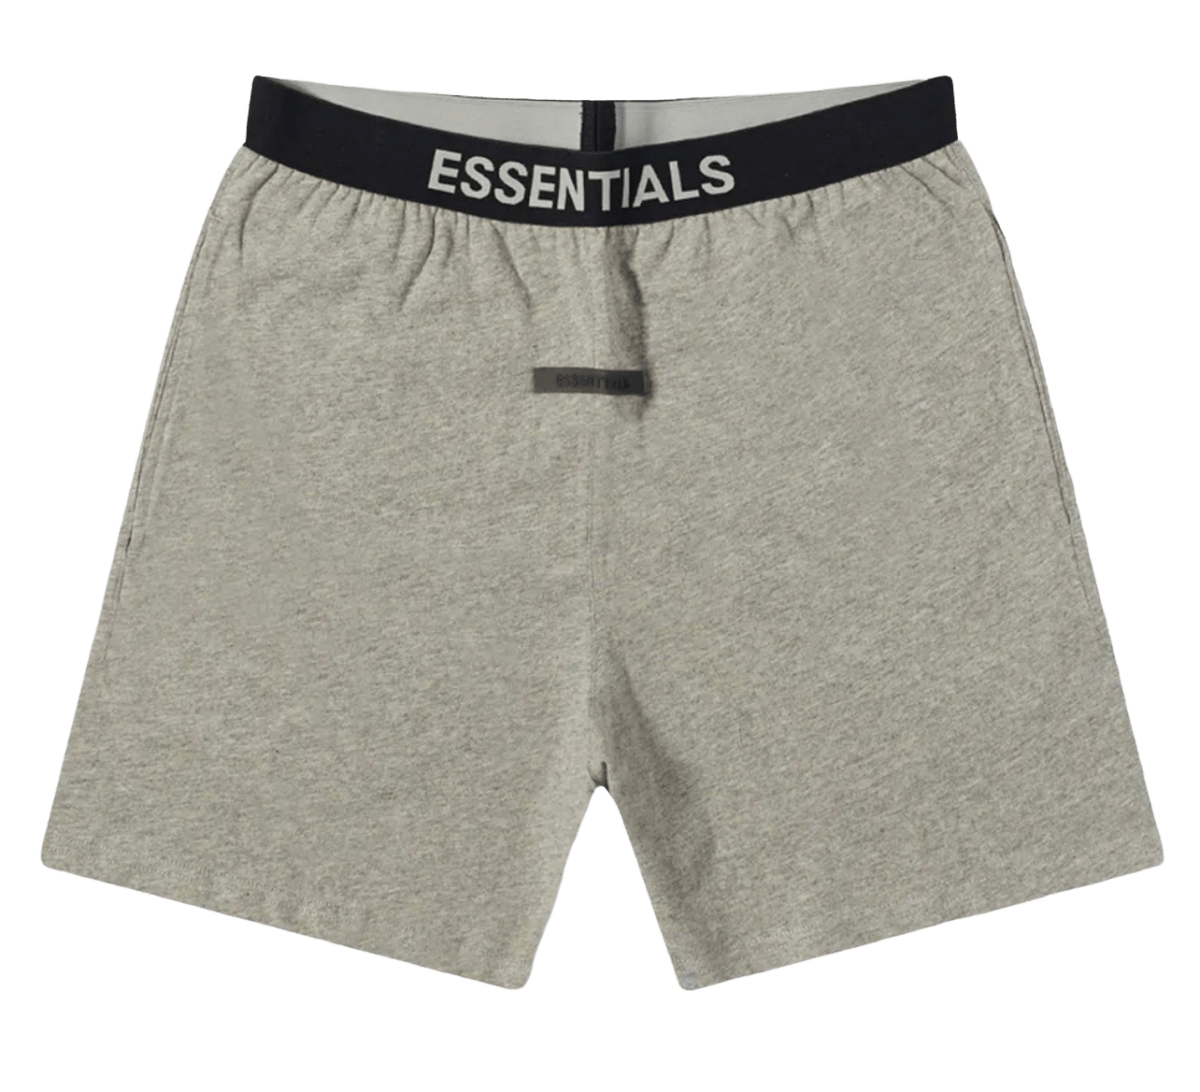 Essentials Fear of God Lounge Shorts Grey - Bottoms - Essentials - Jawns on Fire